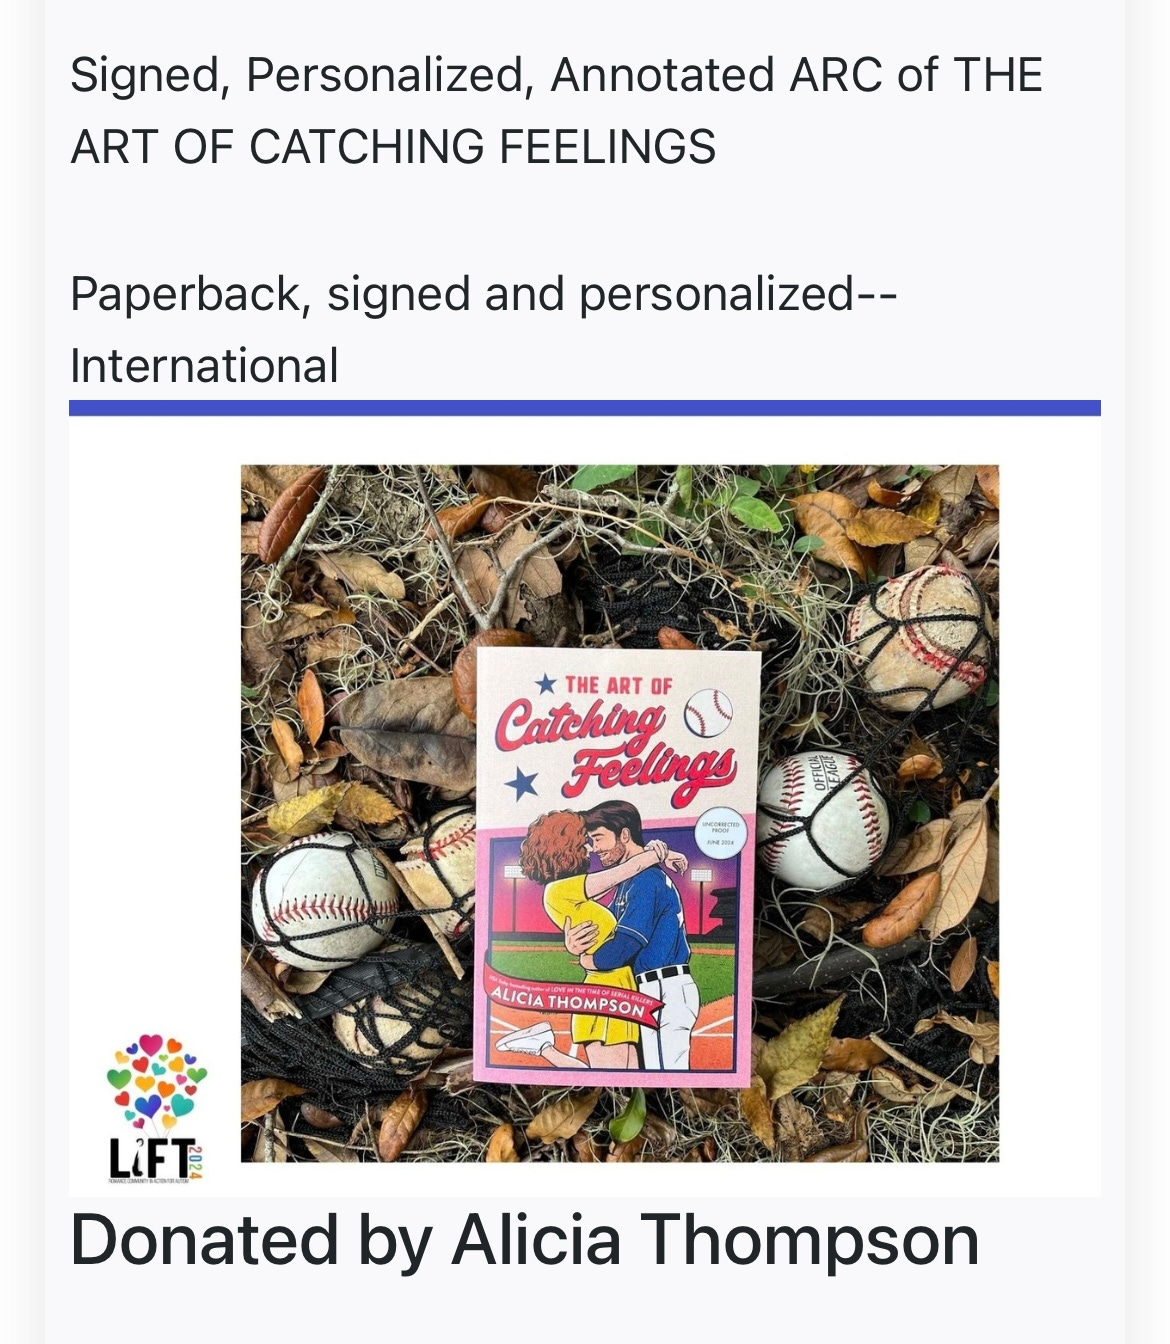 Screenshot from LIFT 4 Autism auction that says "Signed, Personalized, Annotated ARC of THE ART OF CATCHING FEELINGS" and "Paperback, signed and personalized -- International" with the auction logo and "Donated by Alicia Thompson" at the bottom